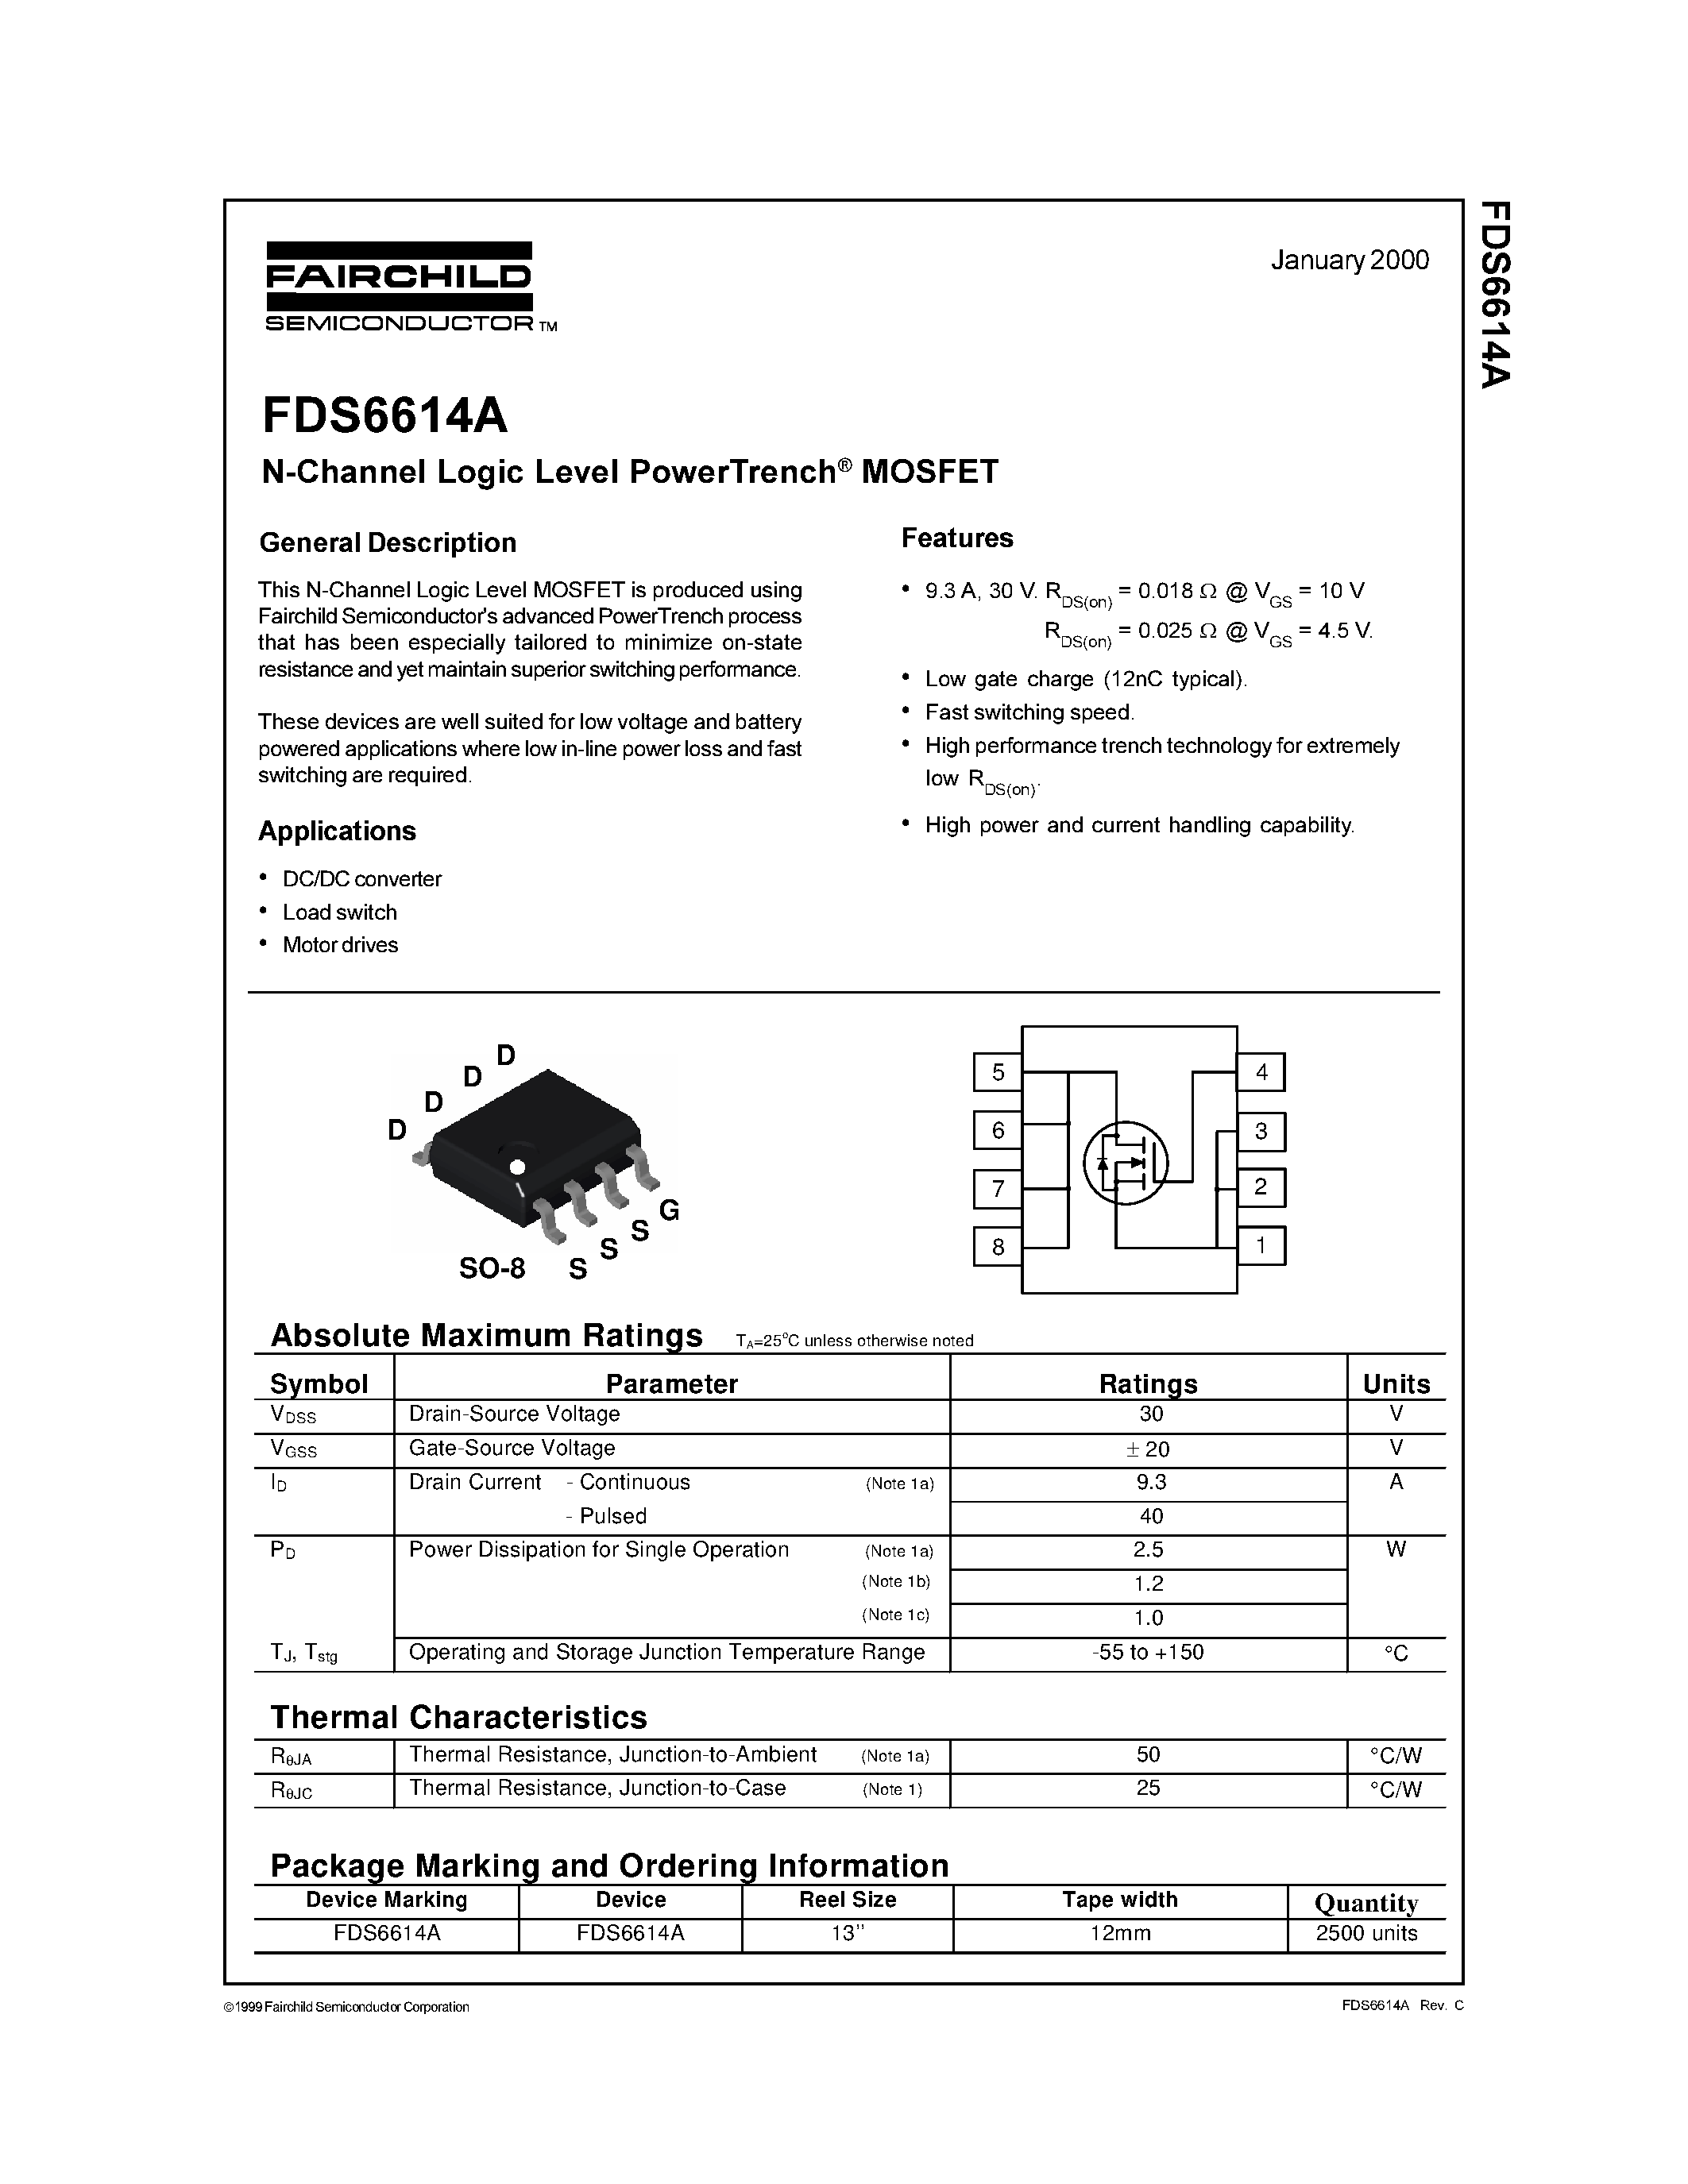 Datasheet FDS6614A - N-Channel Logic Level PowerTrench MOSFET page 1